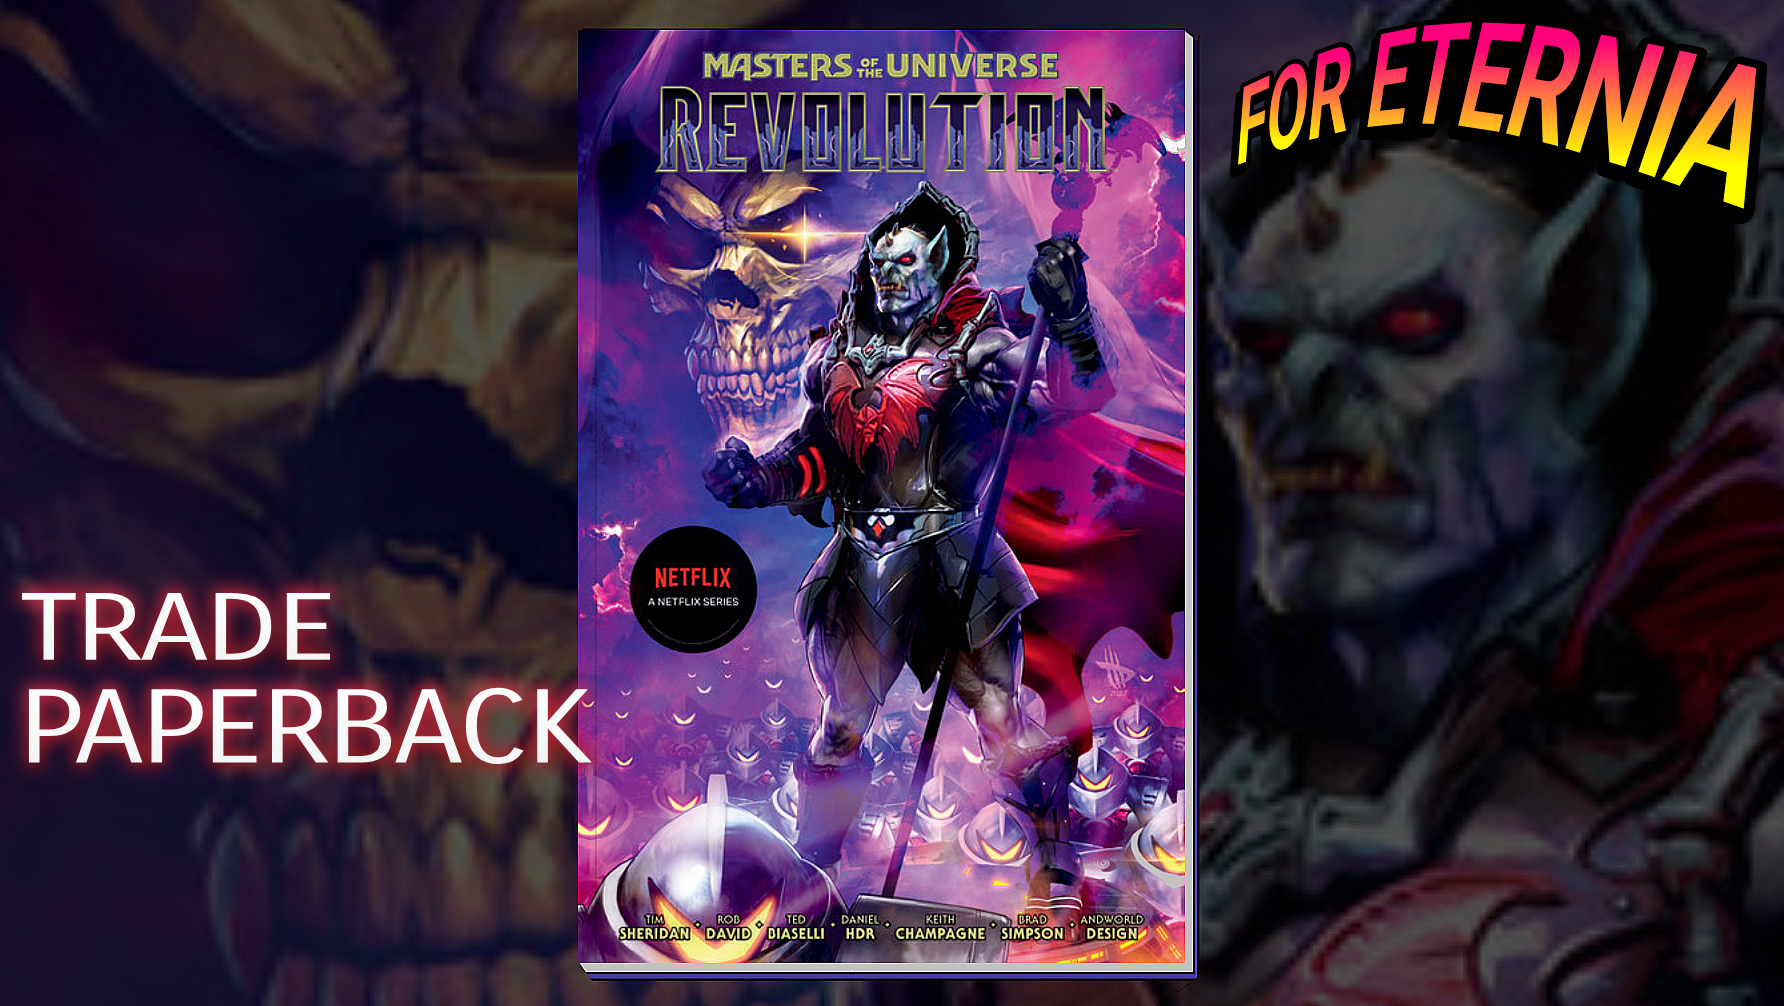 ”Masters of the Universe: Revolution” Prequel Trade Paperback slated for January 14th, 2025